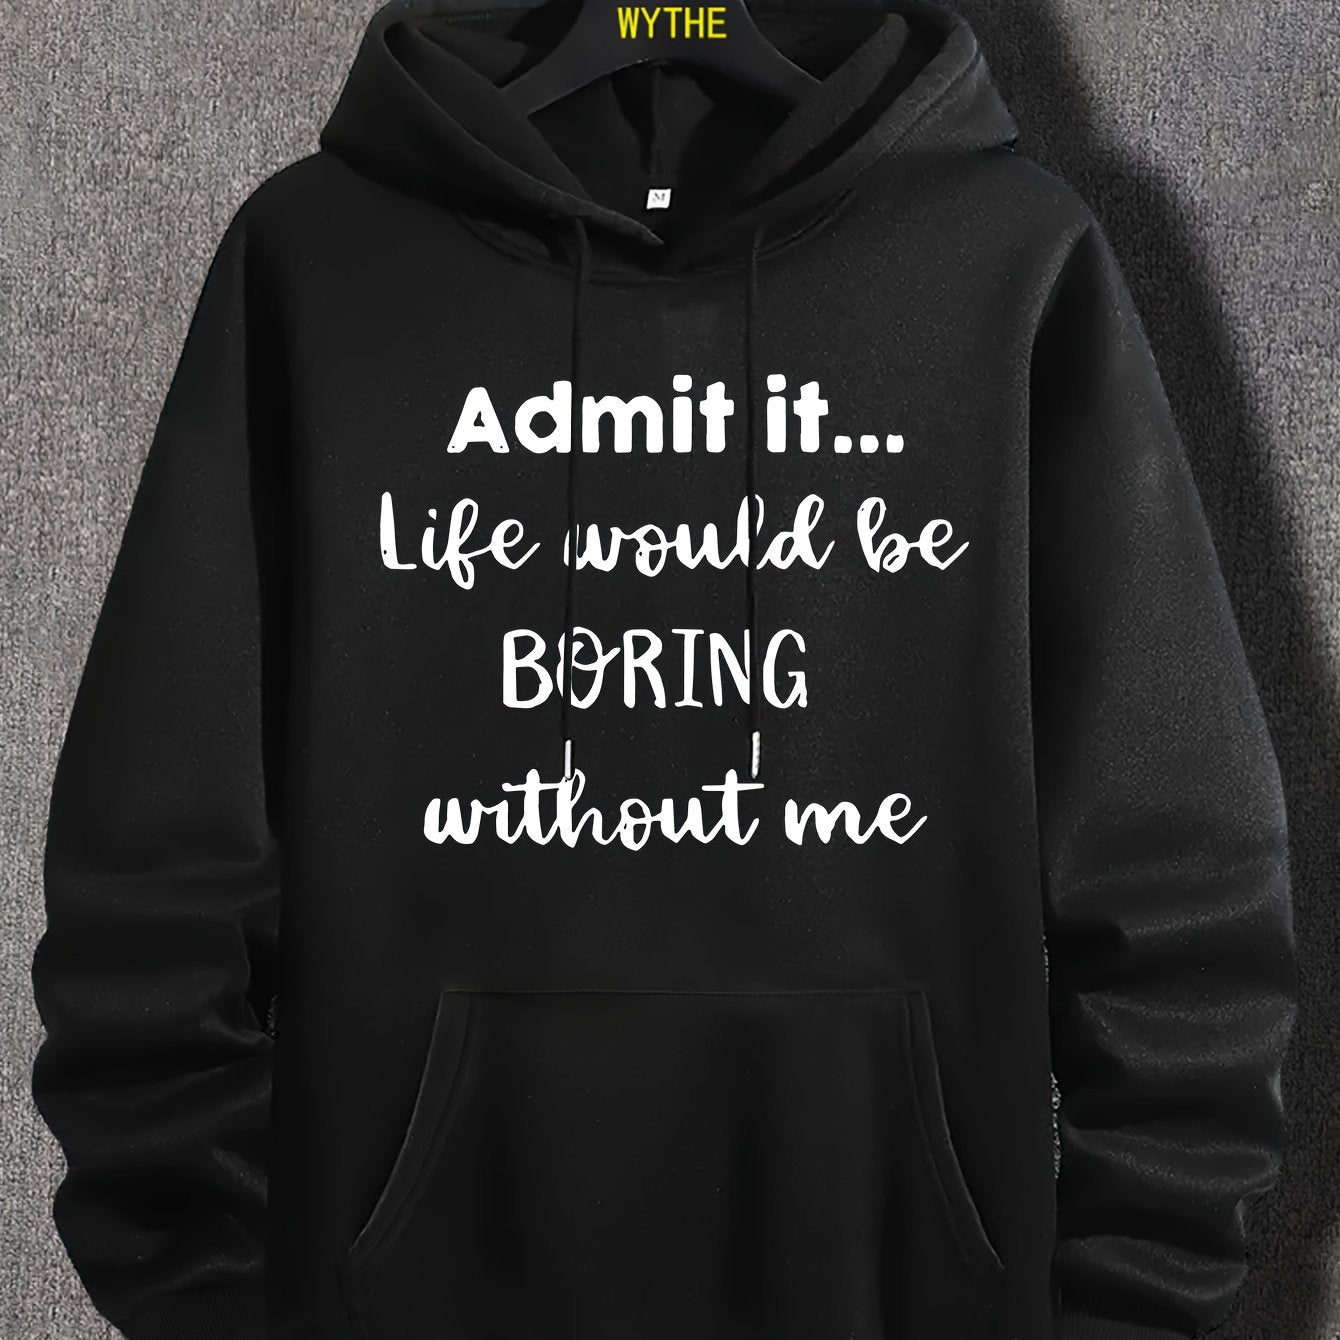 Funny Admit It Print Hoodie, Cool Novel Hoodies For Men, Men's Casual Graphic Design Pullover Hooded Sweatshirt With Kangaroo Pocket Streetwear For Winter Fall, As Gifts